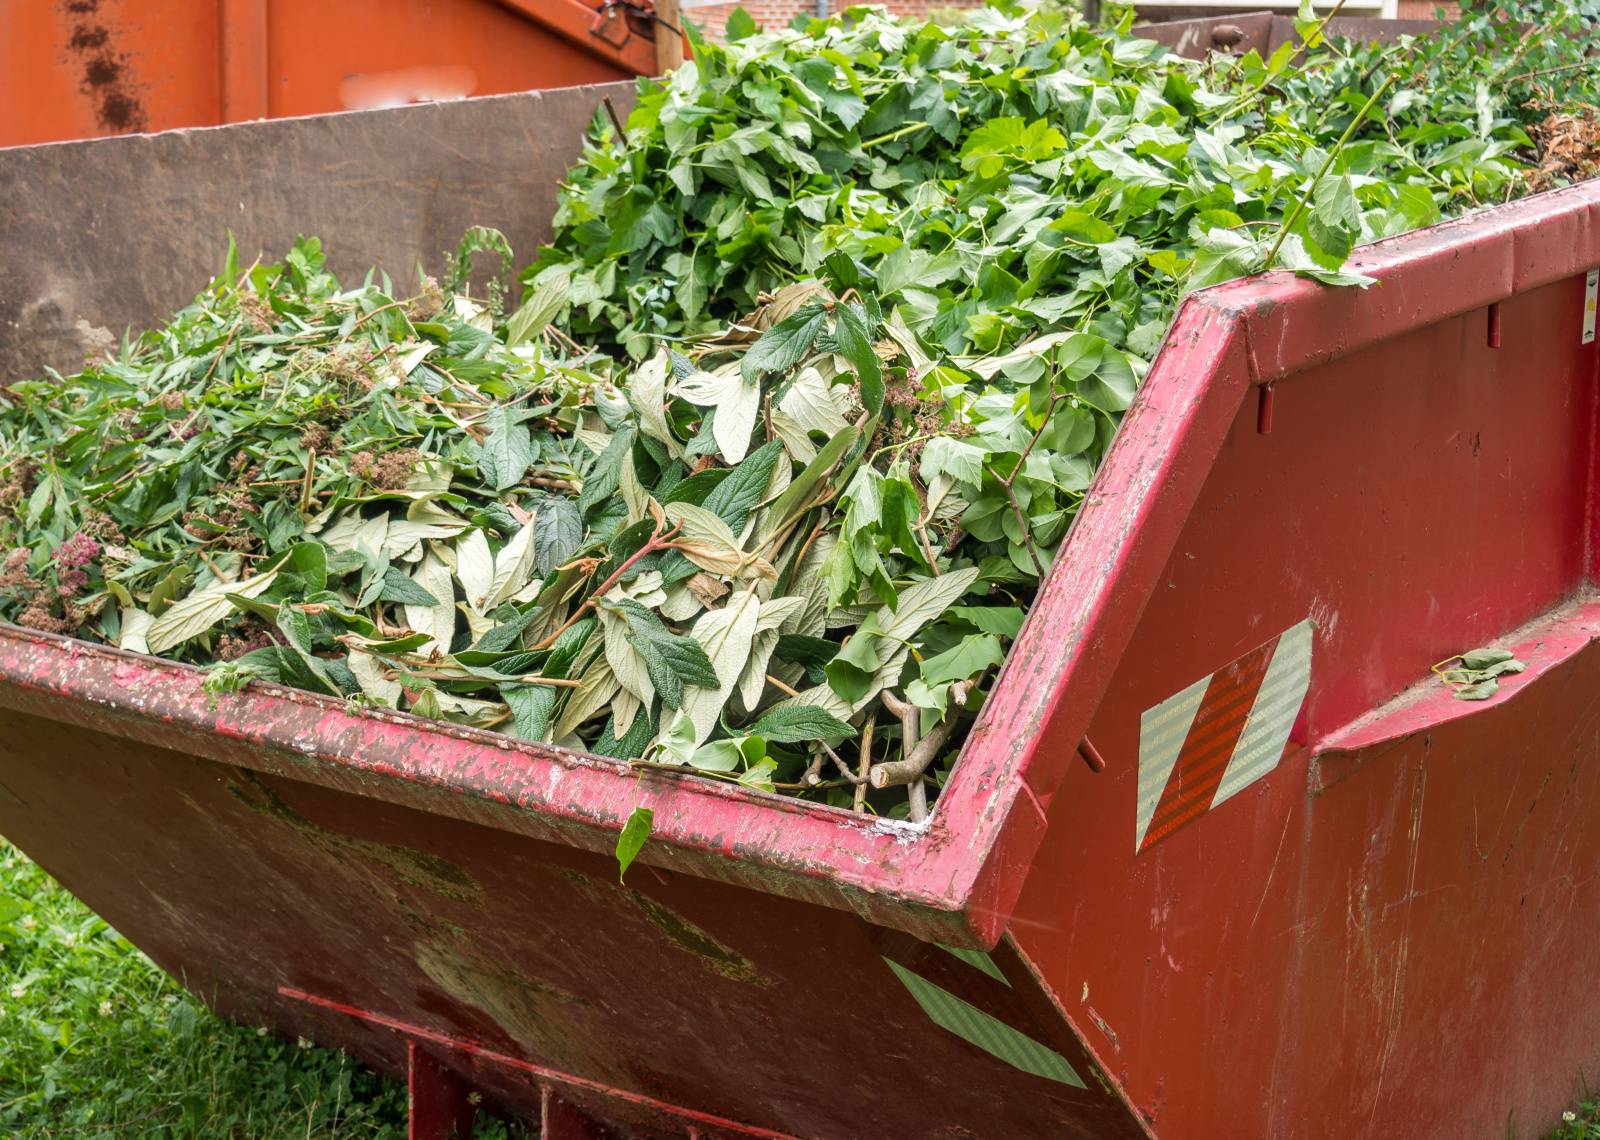 What’s the difference between a Garden Skip Bin and a Skip Bin?